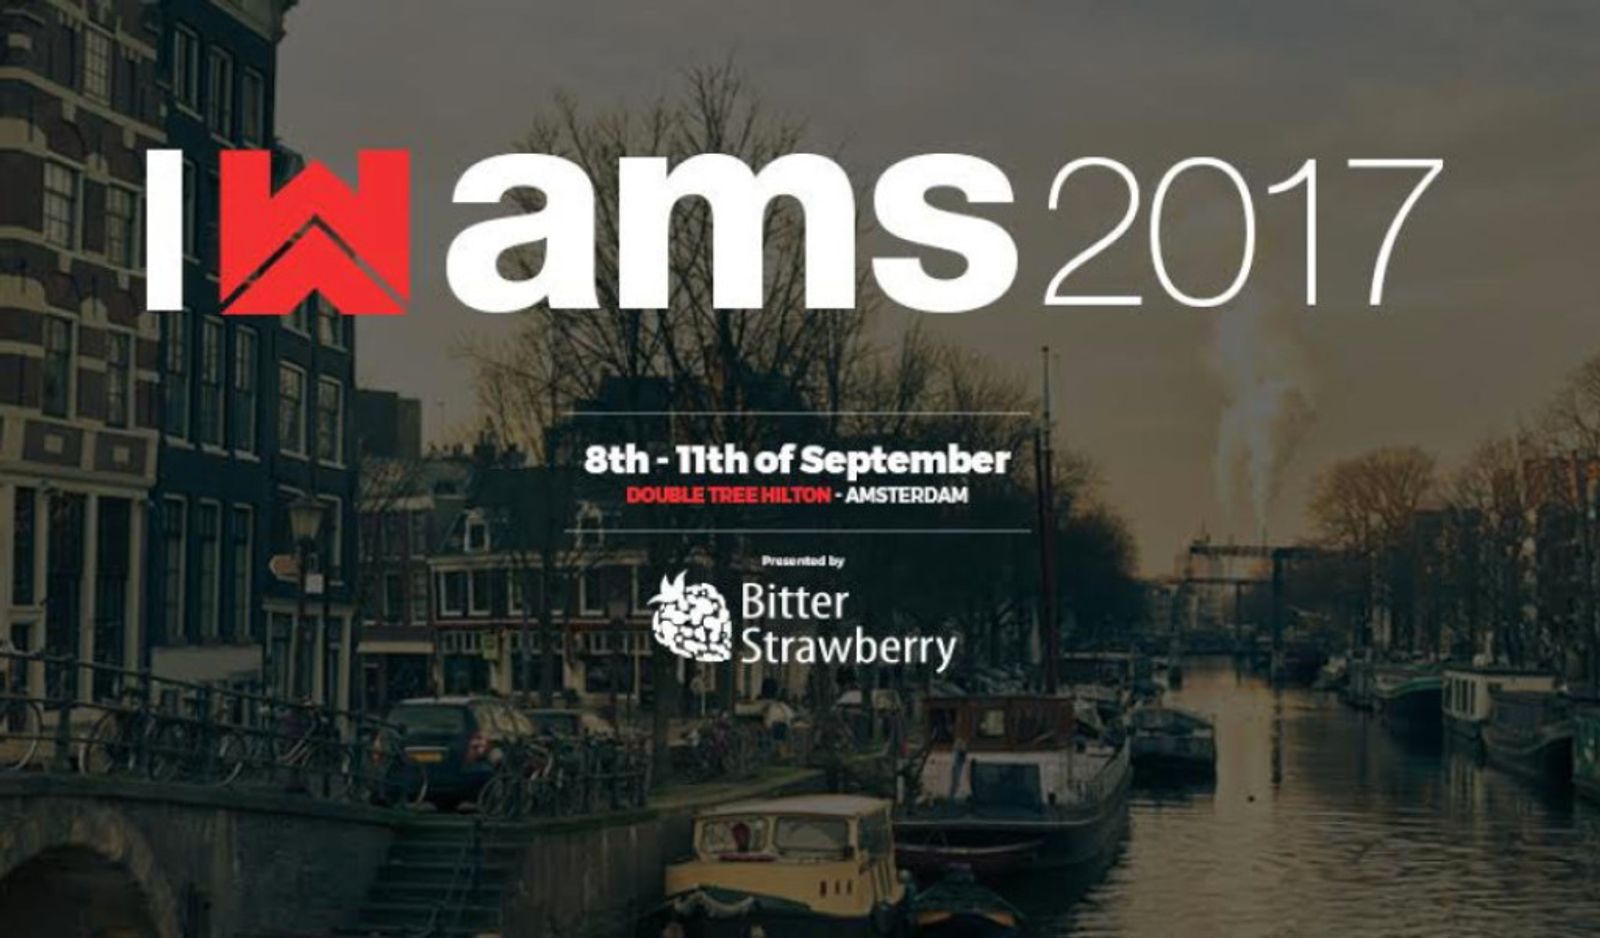 Webmaster Access Amsterdam 2017 Hotel Room Block Nearly Sold Out